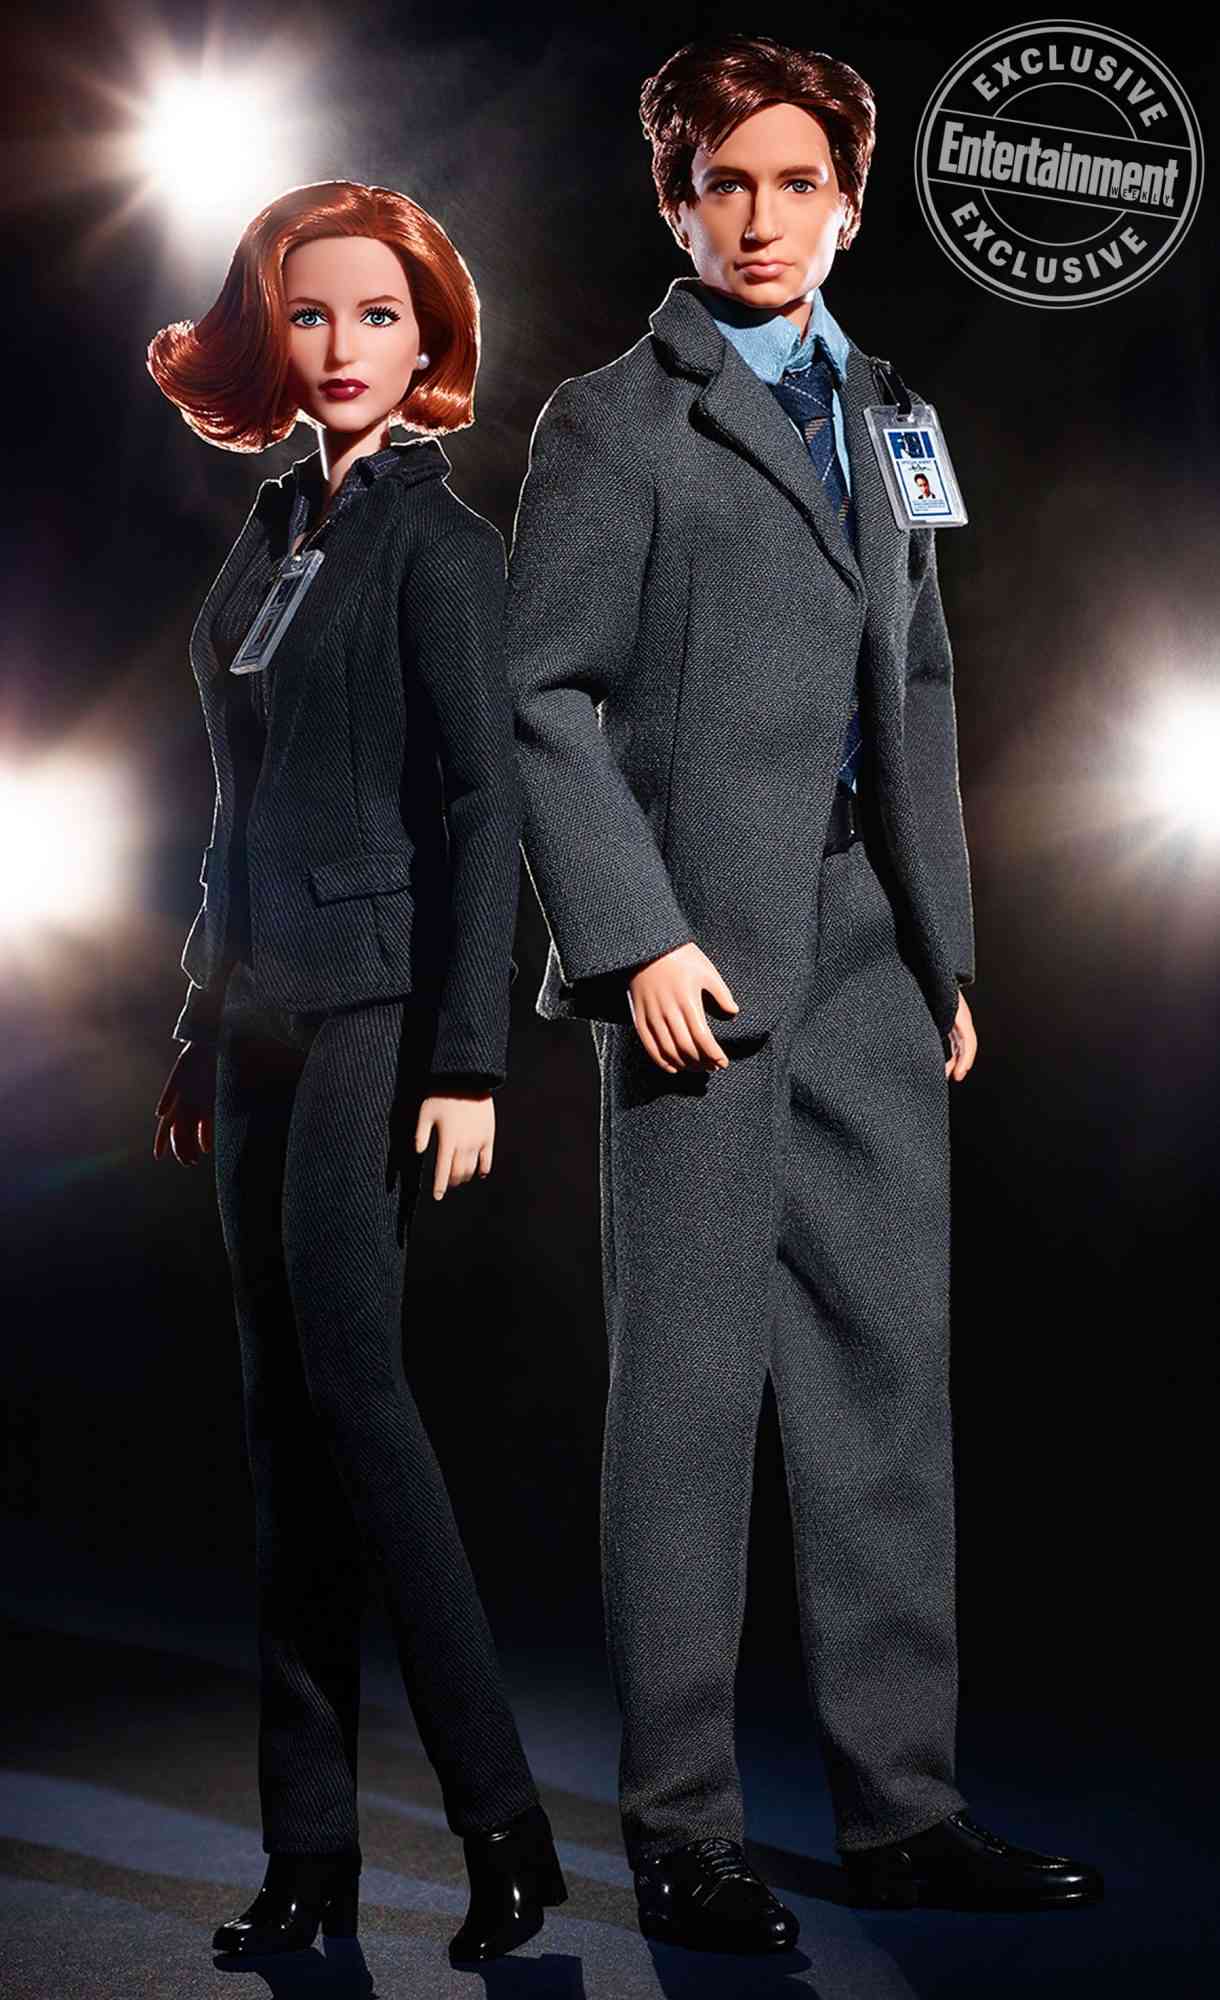 'The X-Files' celebrates 25th anniversary with Mulder/Scully Barbies